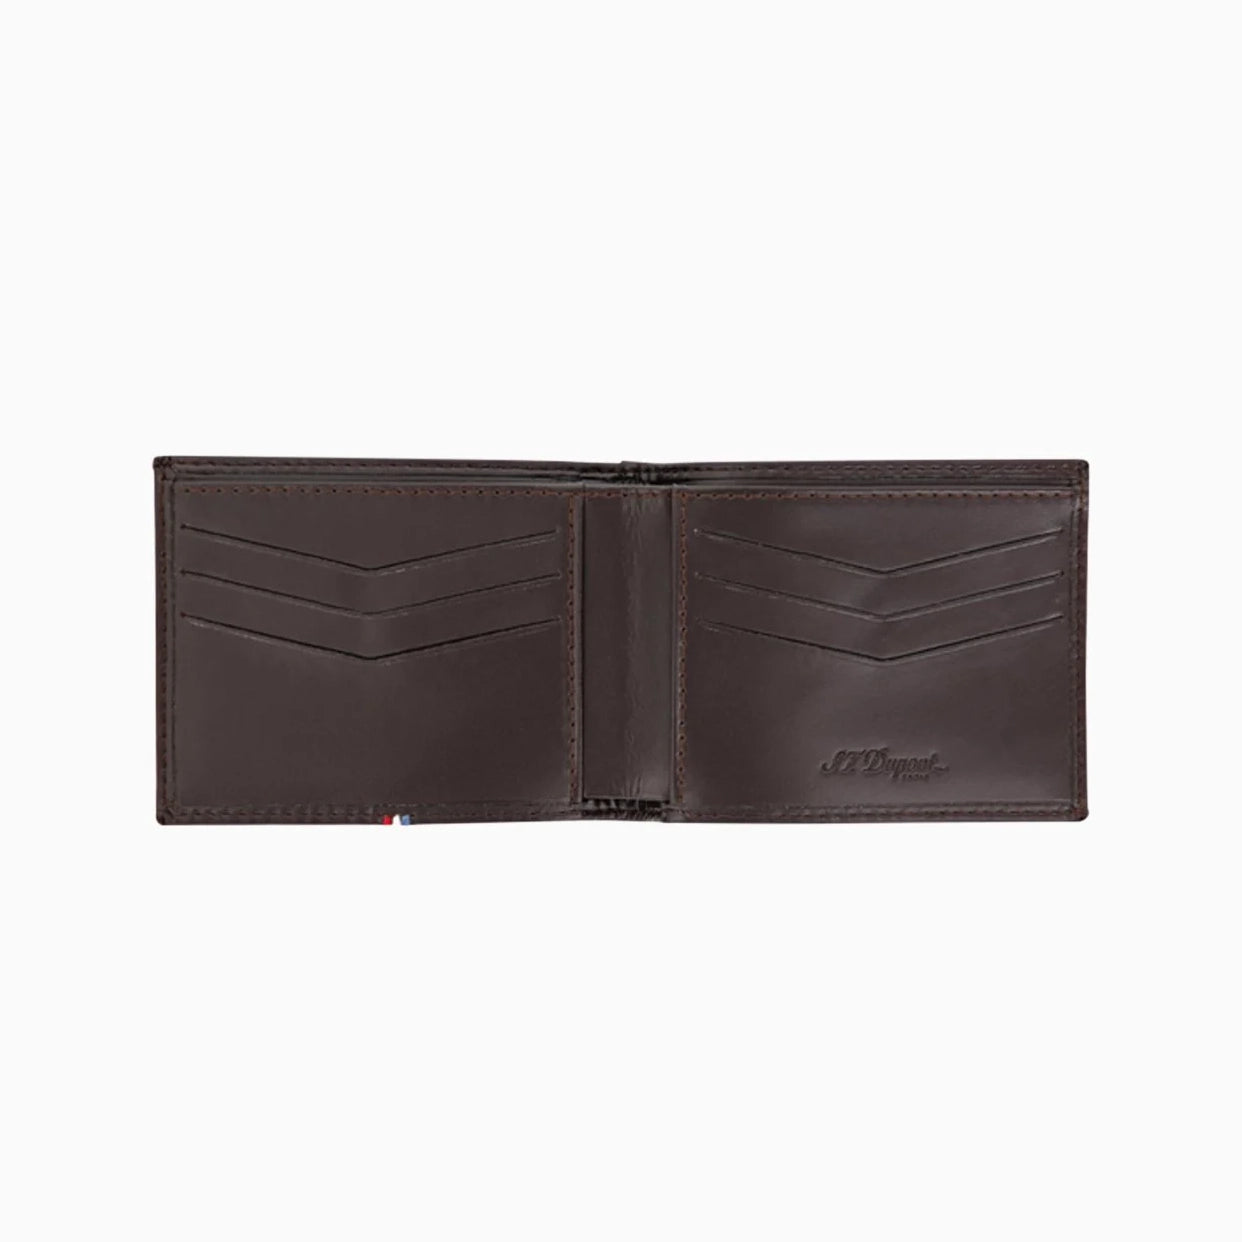 DUPONT ACCESSORIES BILLFOLD 6 CREDIT CARDS LINE D CAPSULE BROWN NO. 184604